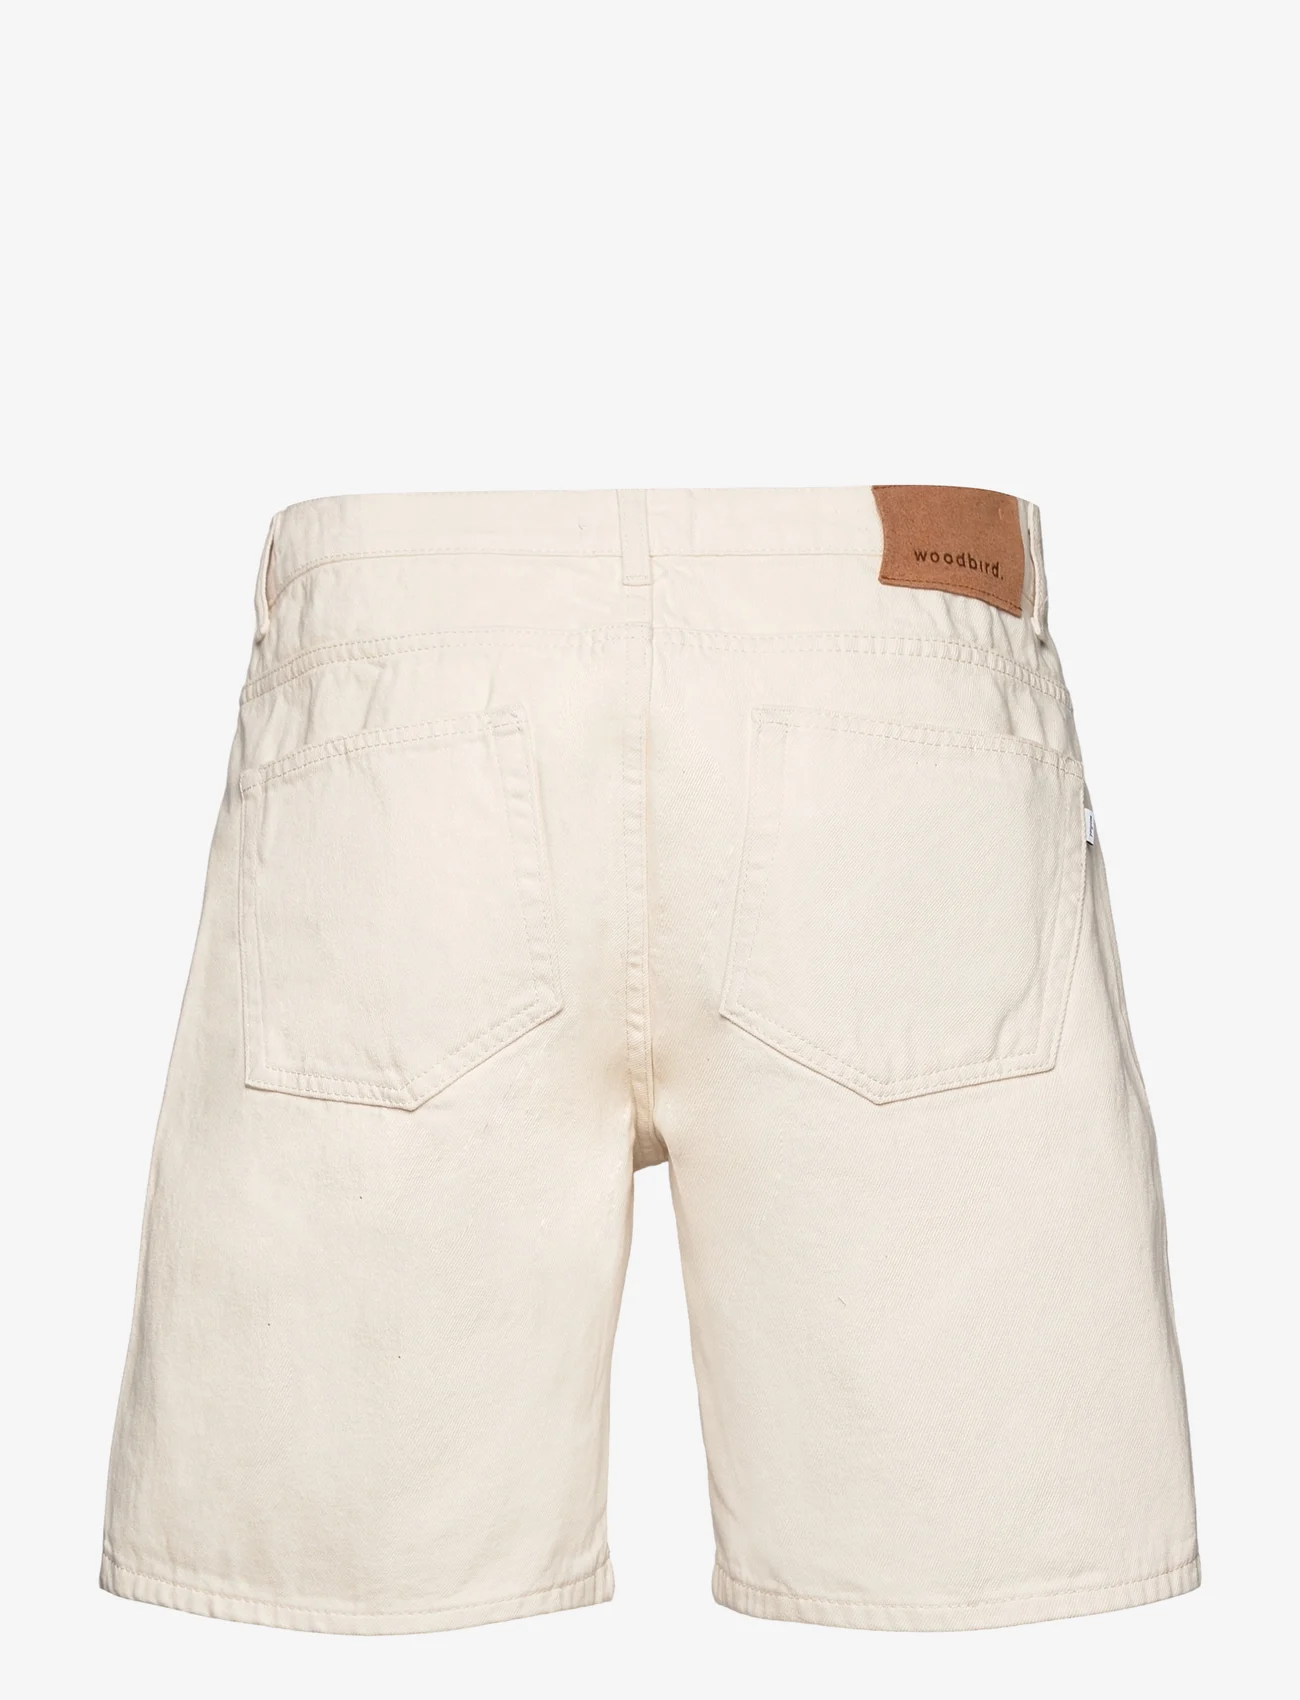 Woodbird - Doc Twill Shorts - jeans shorts - off white - 1